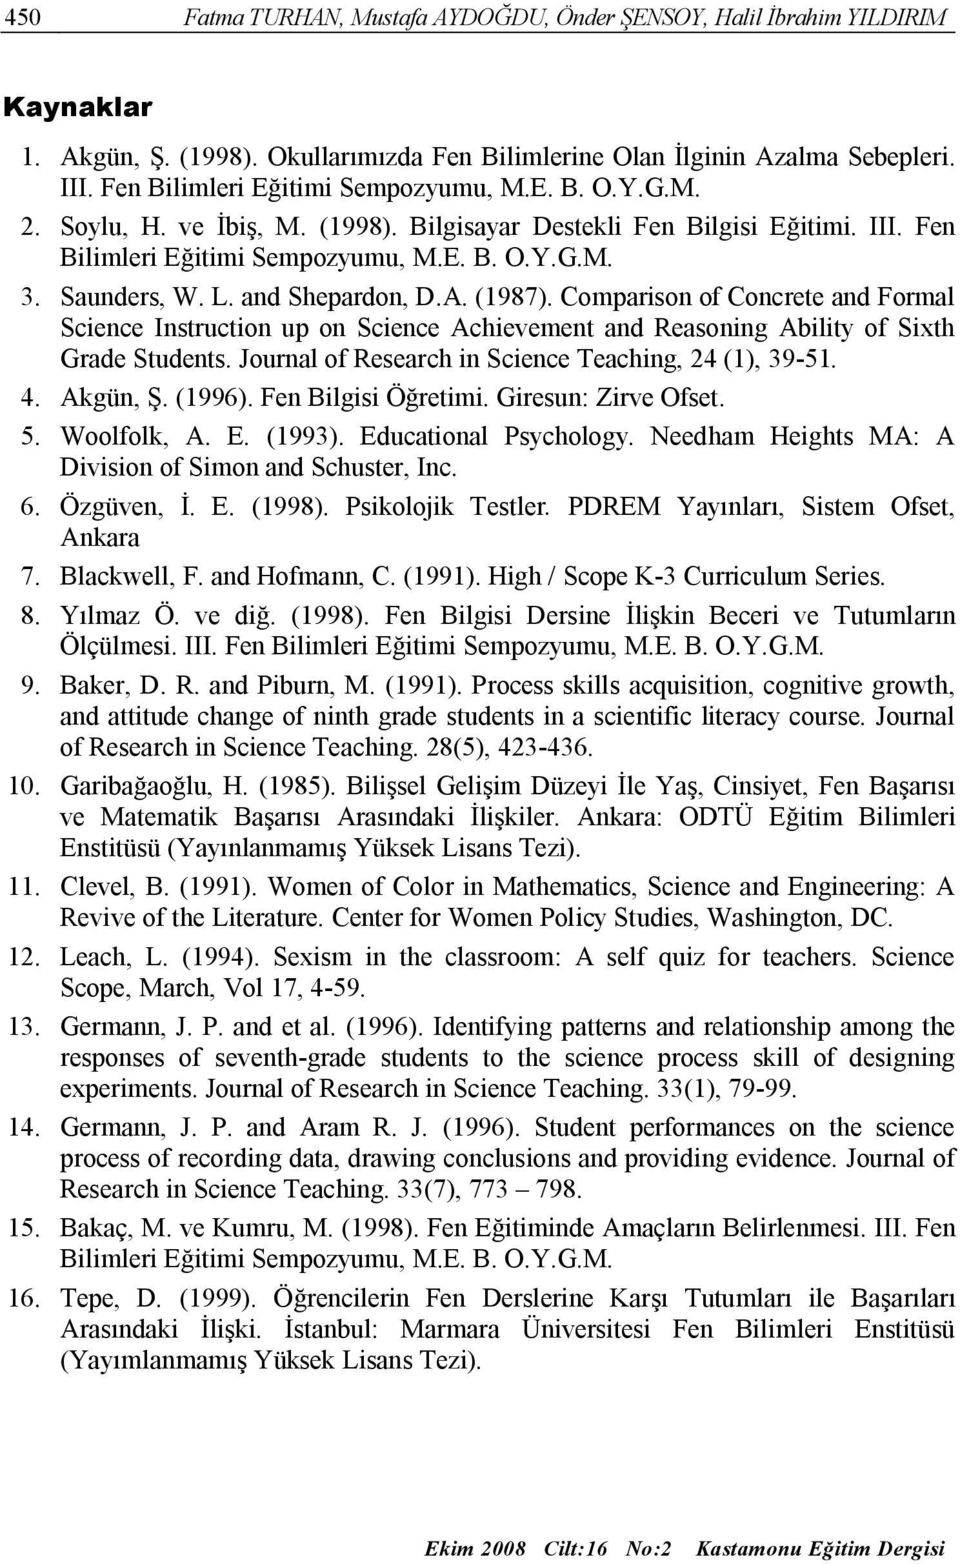 and Shepardon, D.A. (1987). Comparison of Concrete and Formal Science Instruction up on Science Achievement and Reasoning Ability of Sixth Grade Students.